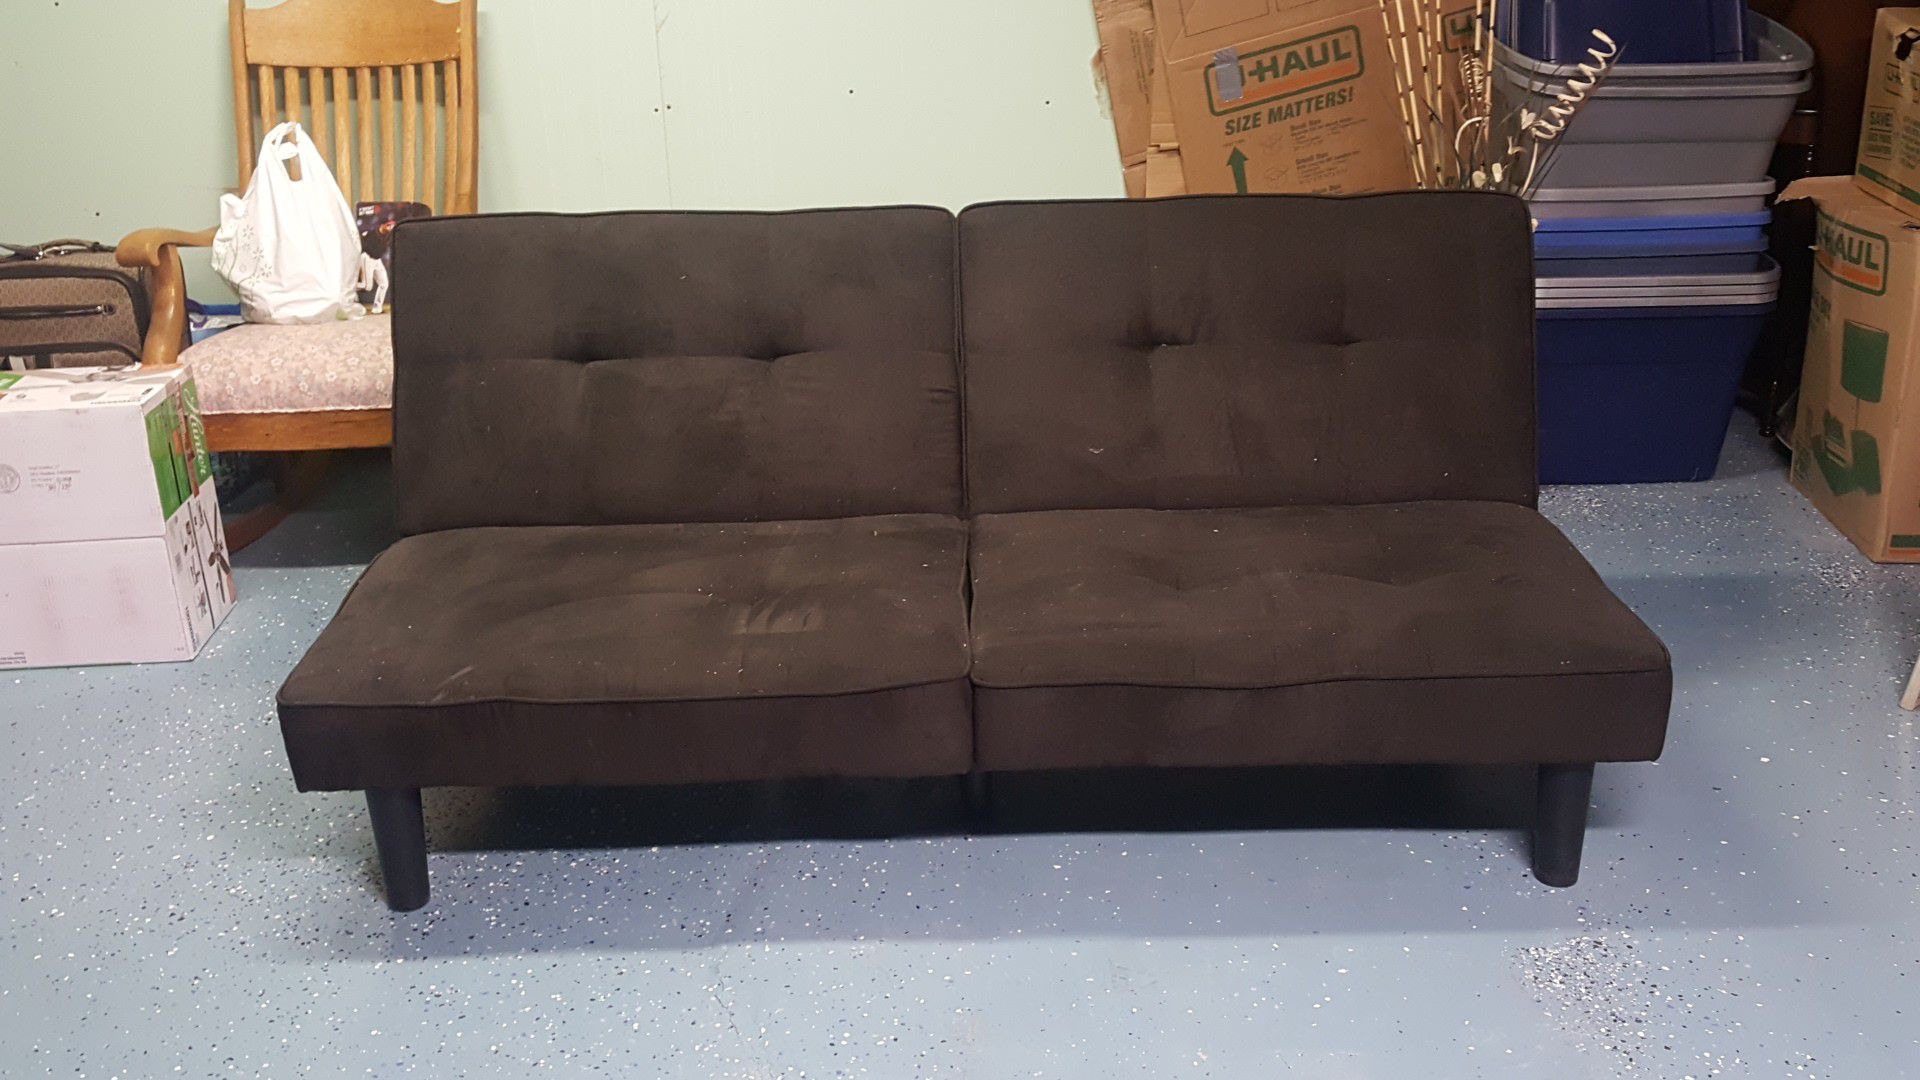 Futon couch/bed